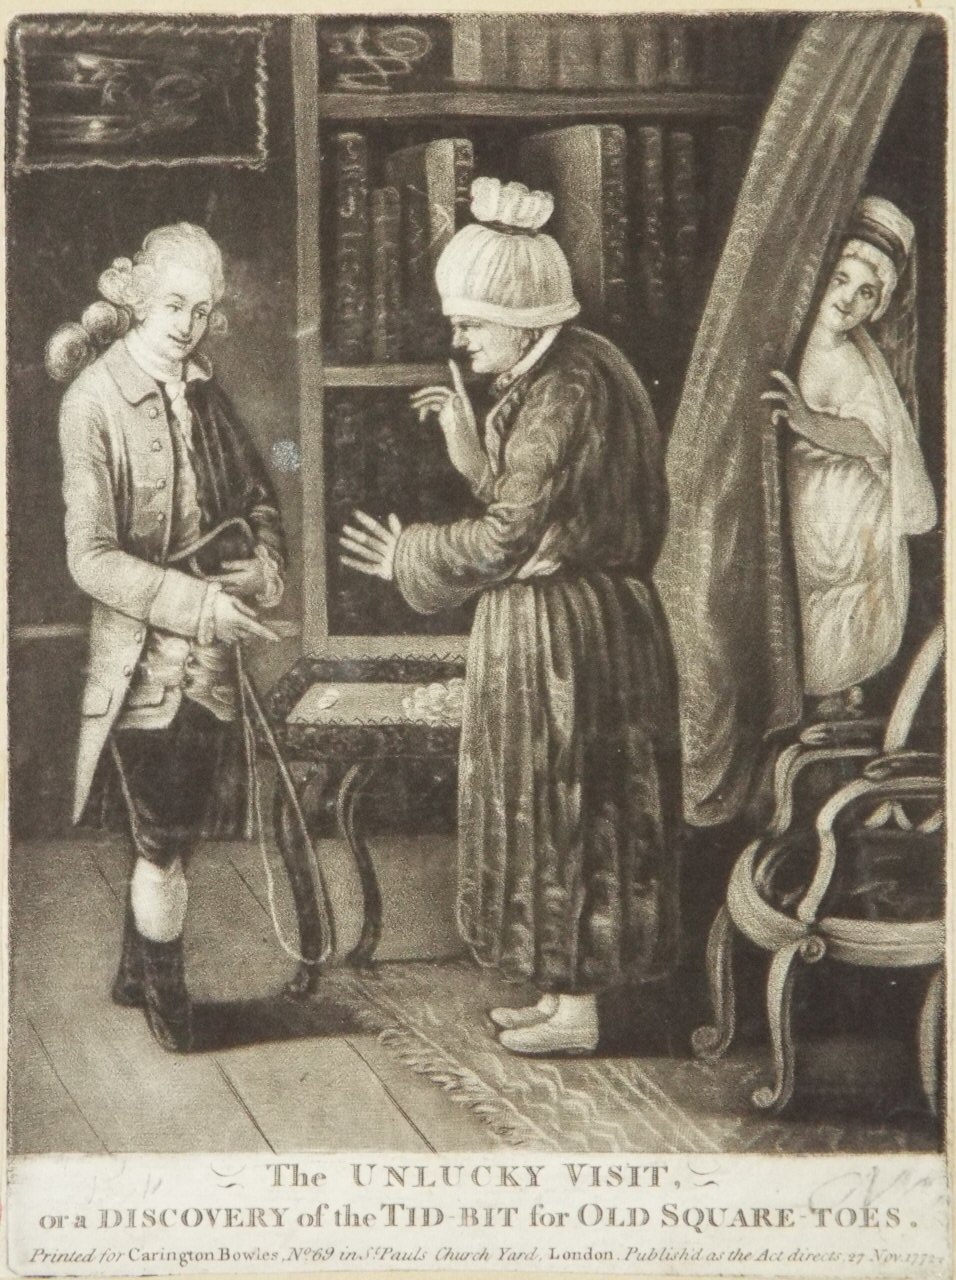 Mezzotint - The Unlucky Visit, or a Discovery of the Tid-bid of Old Square Toes.